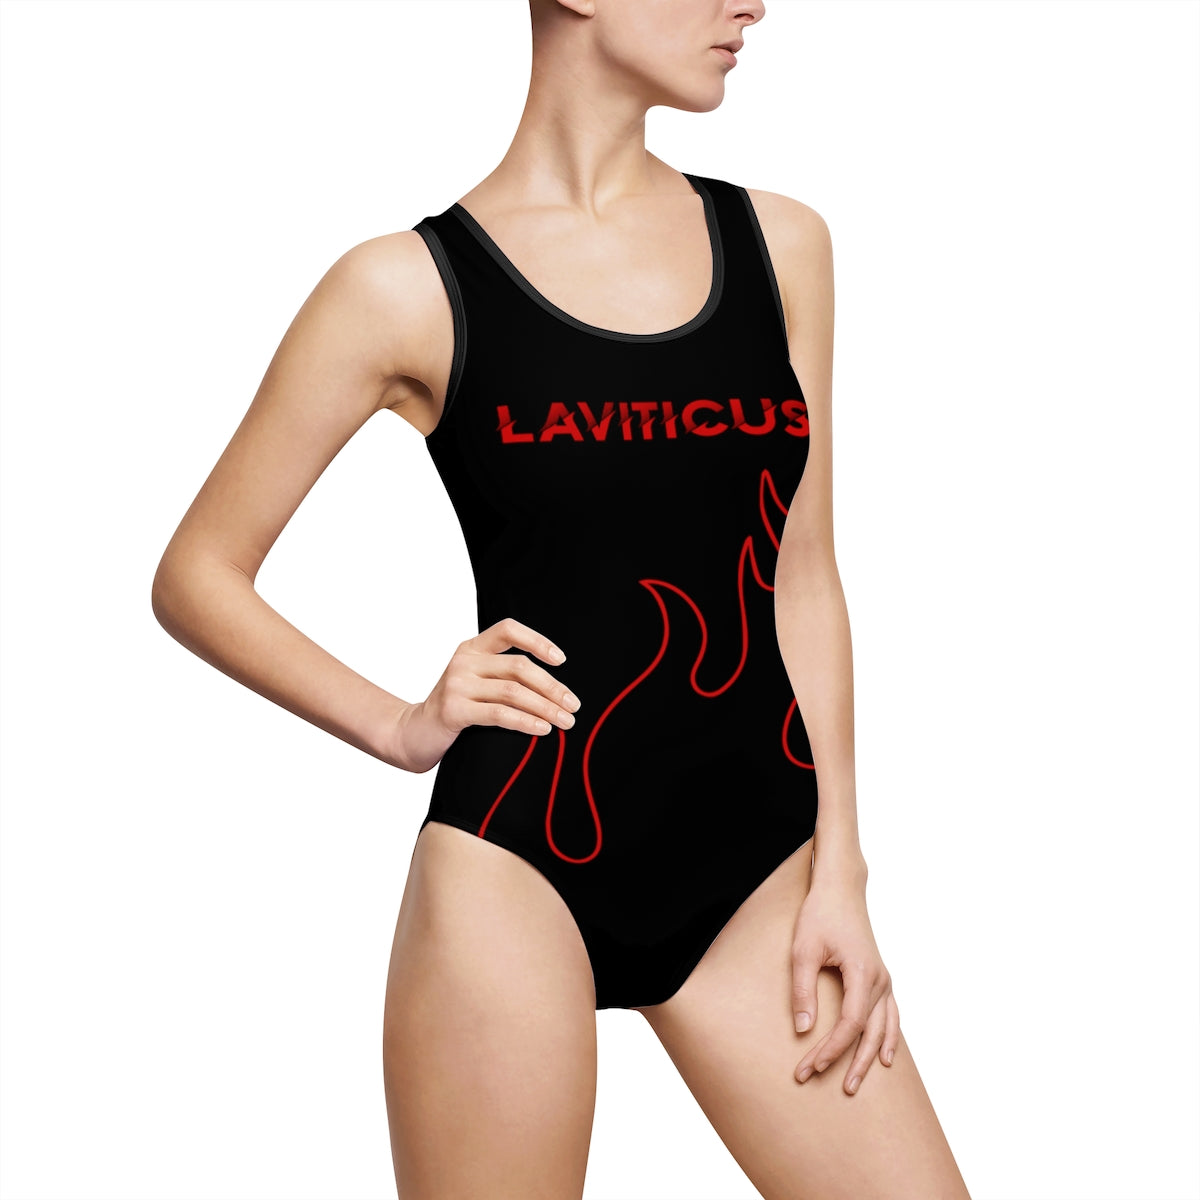 The Laviticus One-piece